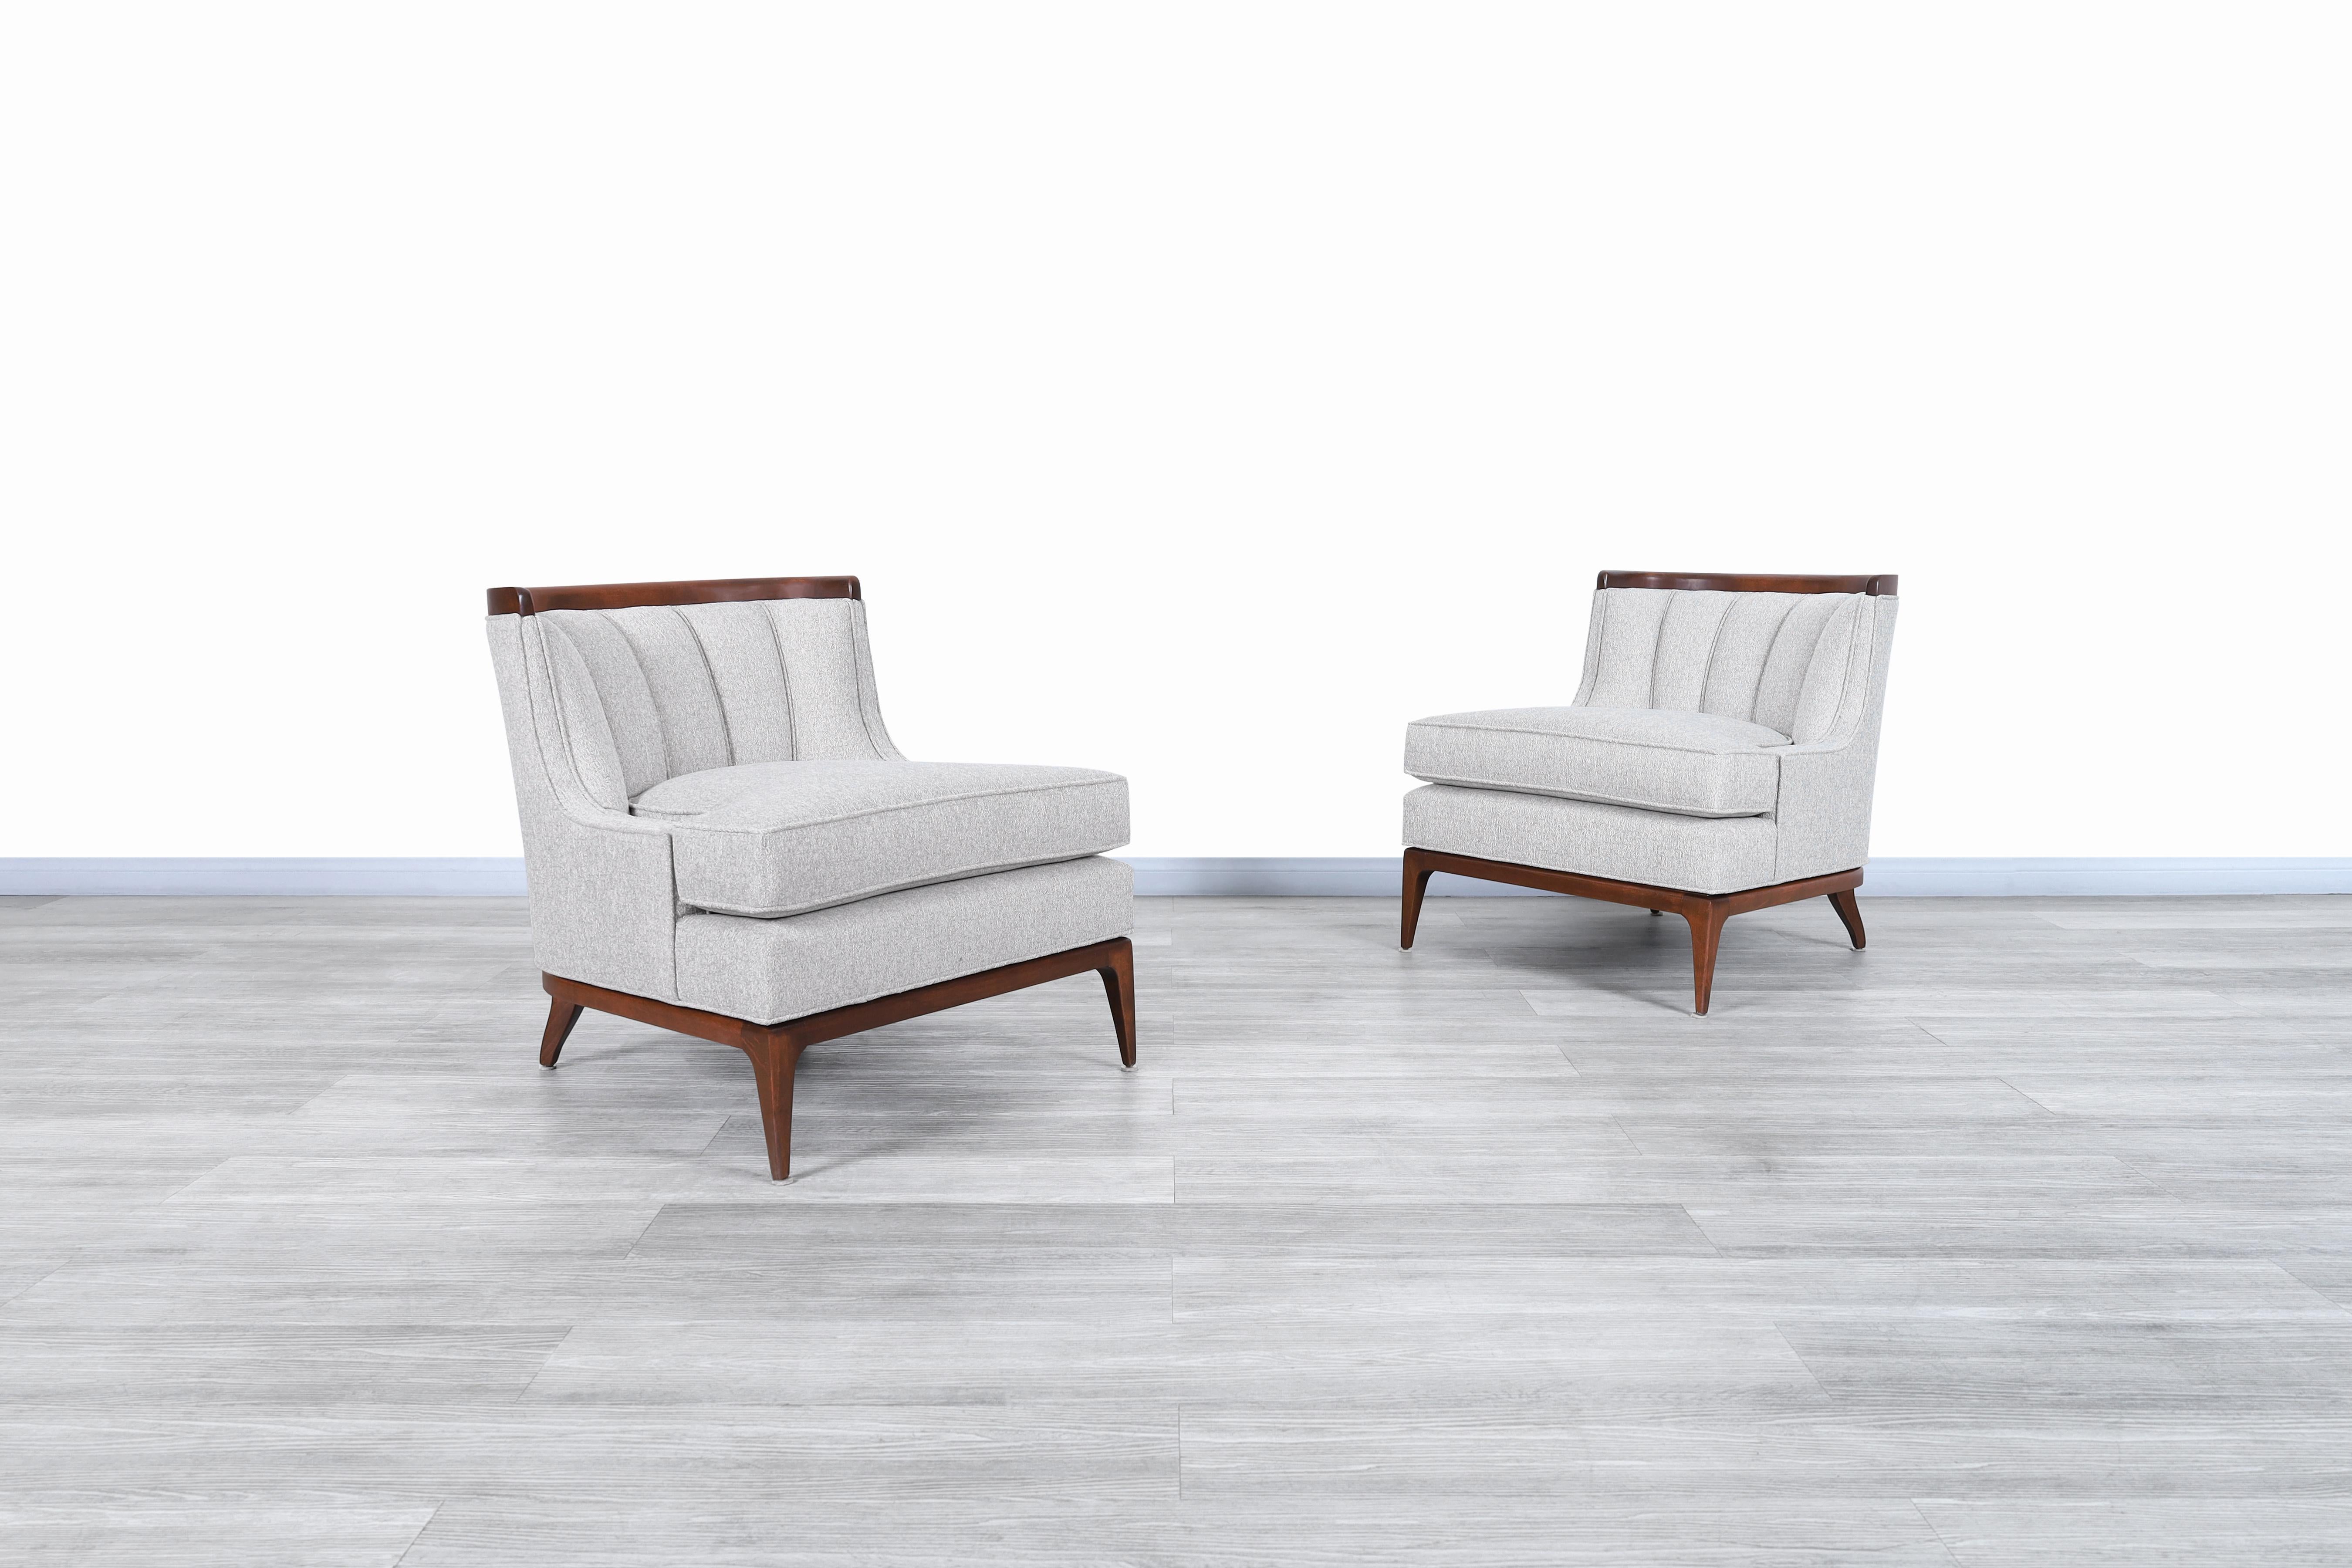 Wonderful pair of vintage sculptural walnut lounge chairs in the manner of Erwin Lambeth and manufactured in the United States, circa 1950s. These incredible chairs feature solid walnut details that surround the chairs, and in addition to this, the